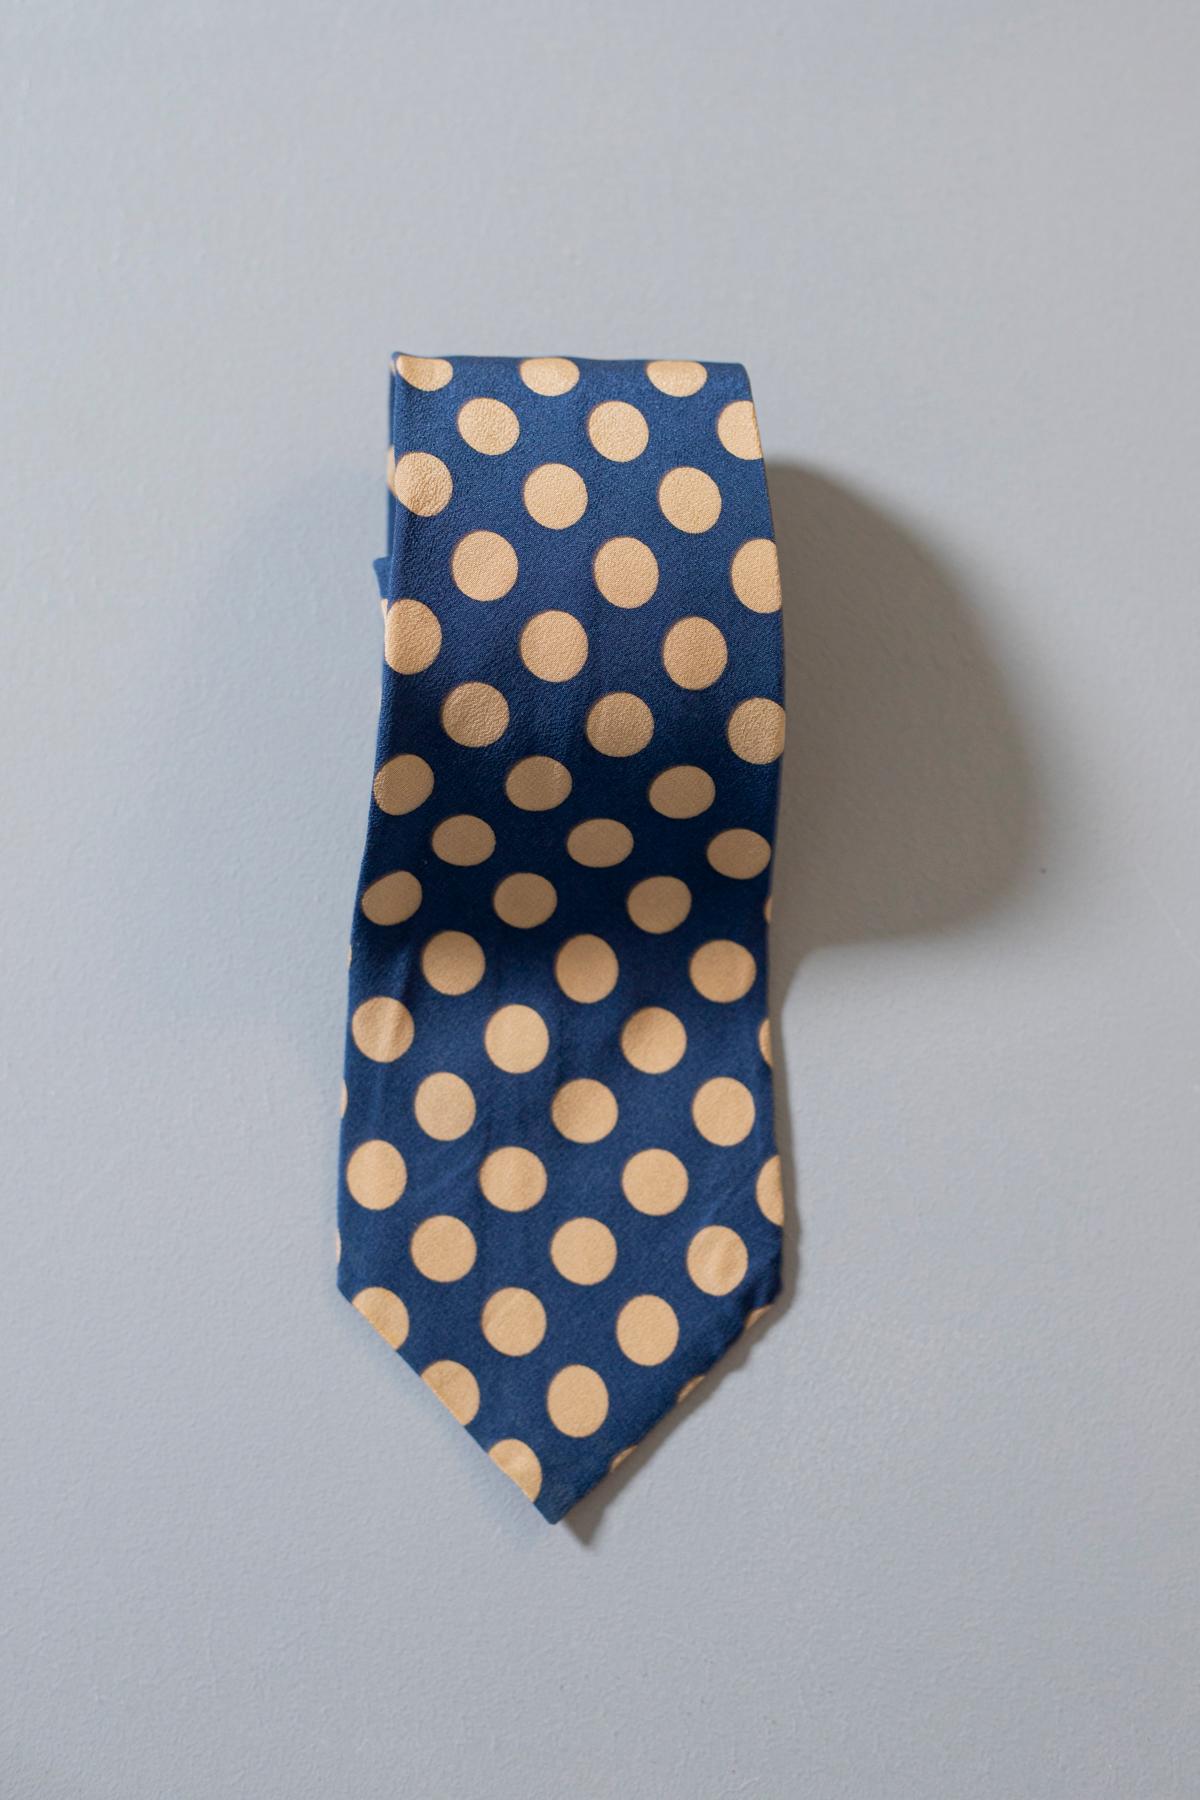 Simple but at the same time very refined tie designed by Philippe Larror, made of 100% silk, for this reason it is very soft and fresh. Decorated with beige polka dots on a blue background, with a very simple but elegant design and that is why